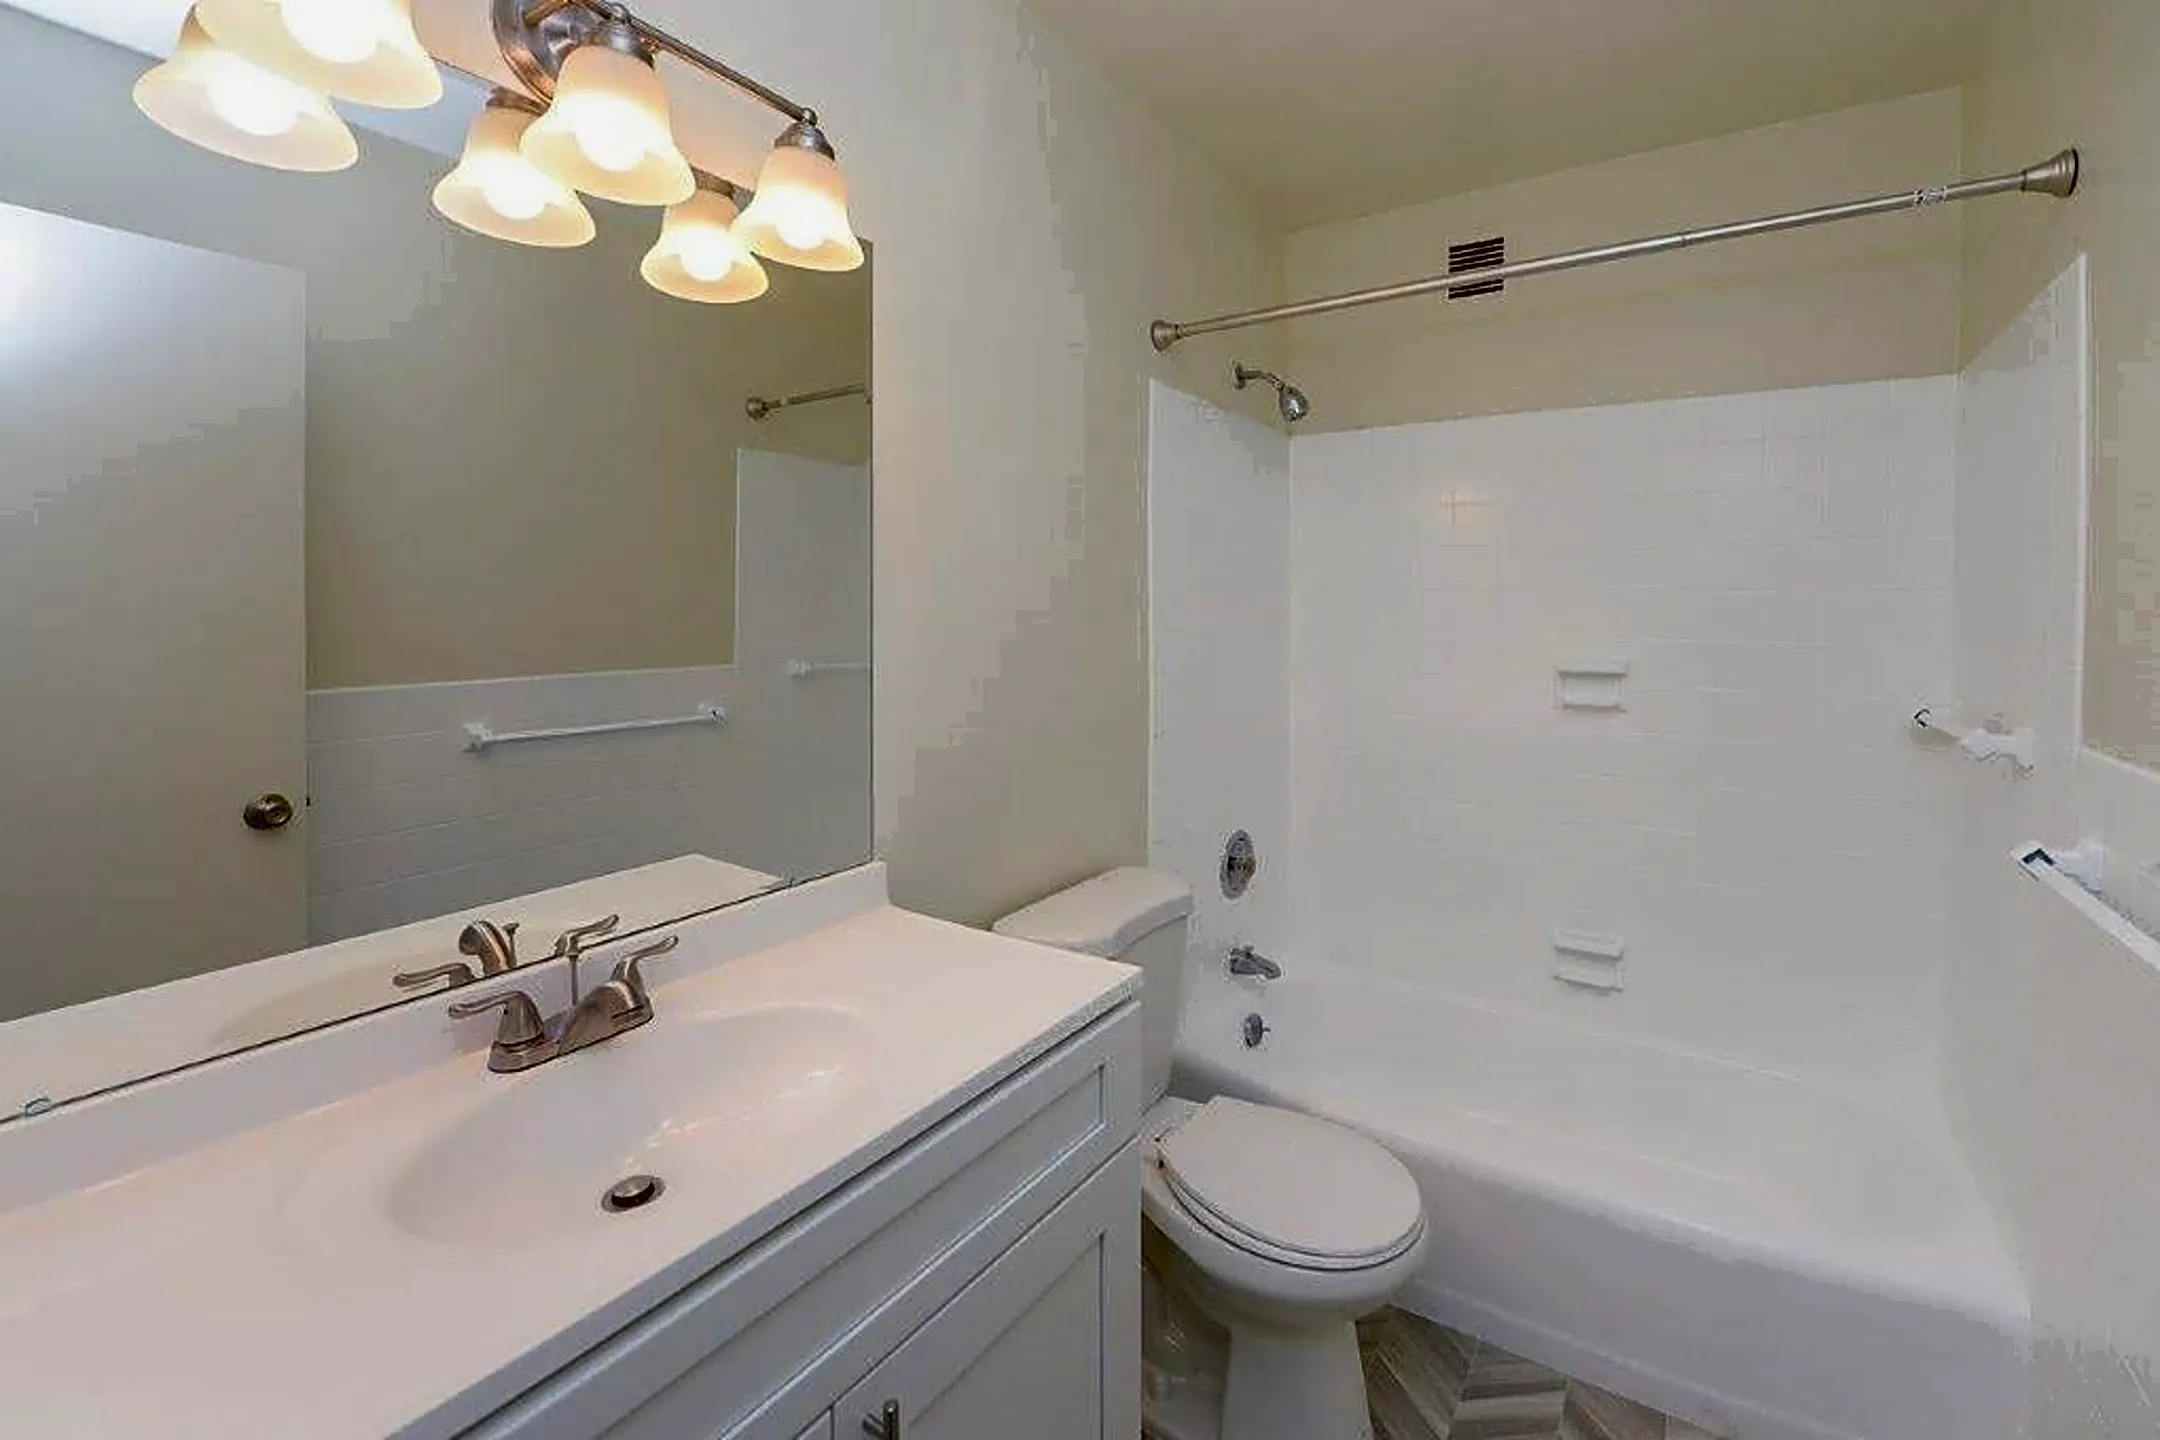 Bathroom - The Carlyle Apartment Homes - Baltimore, MD